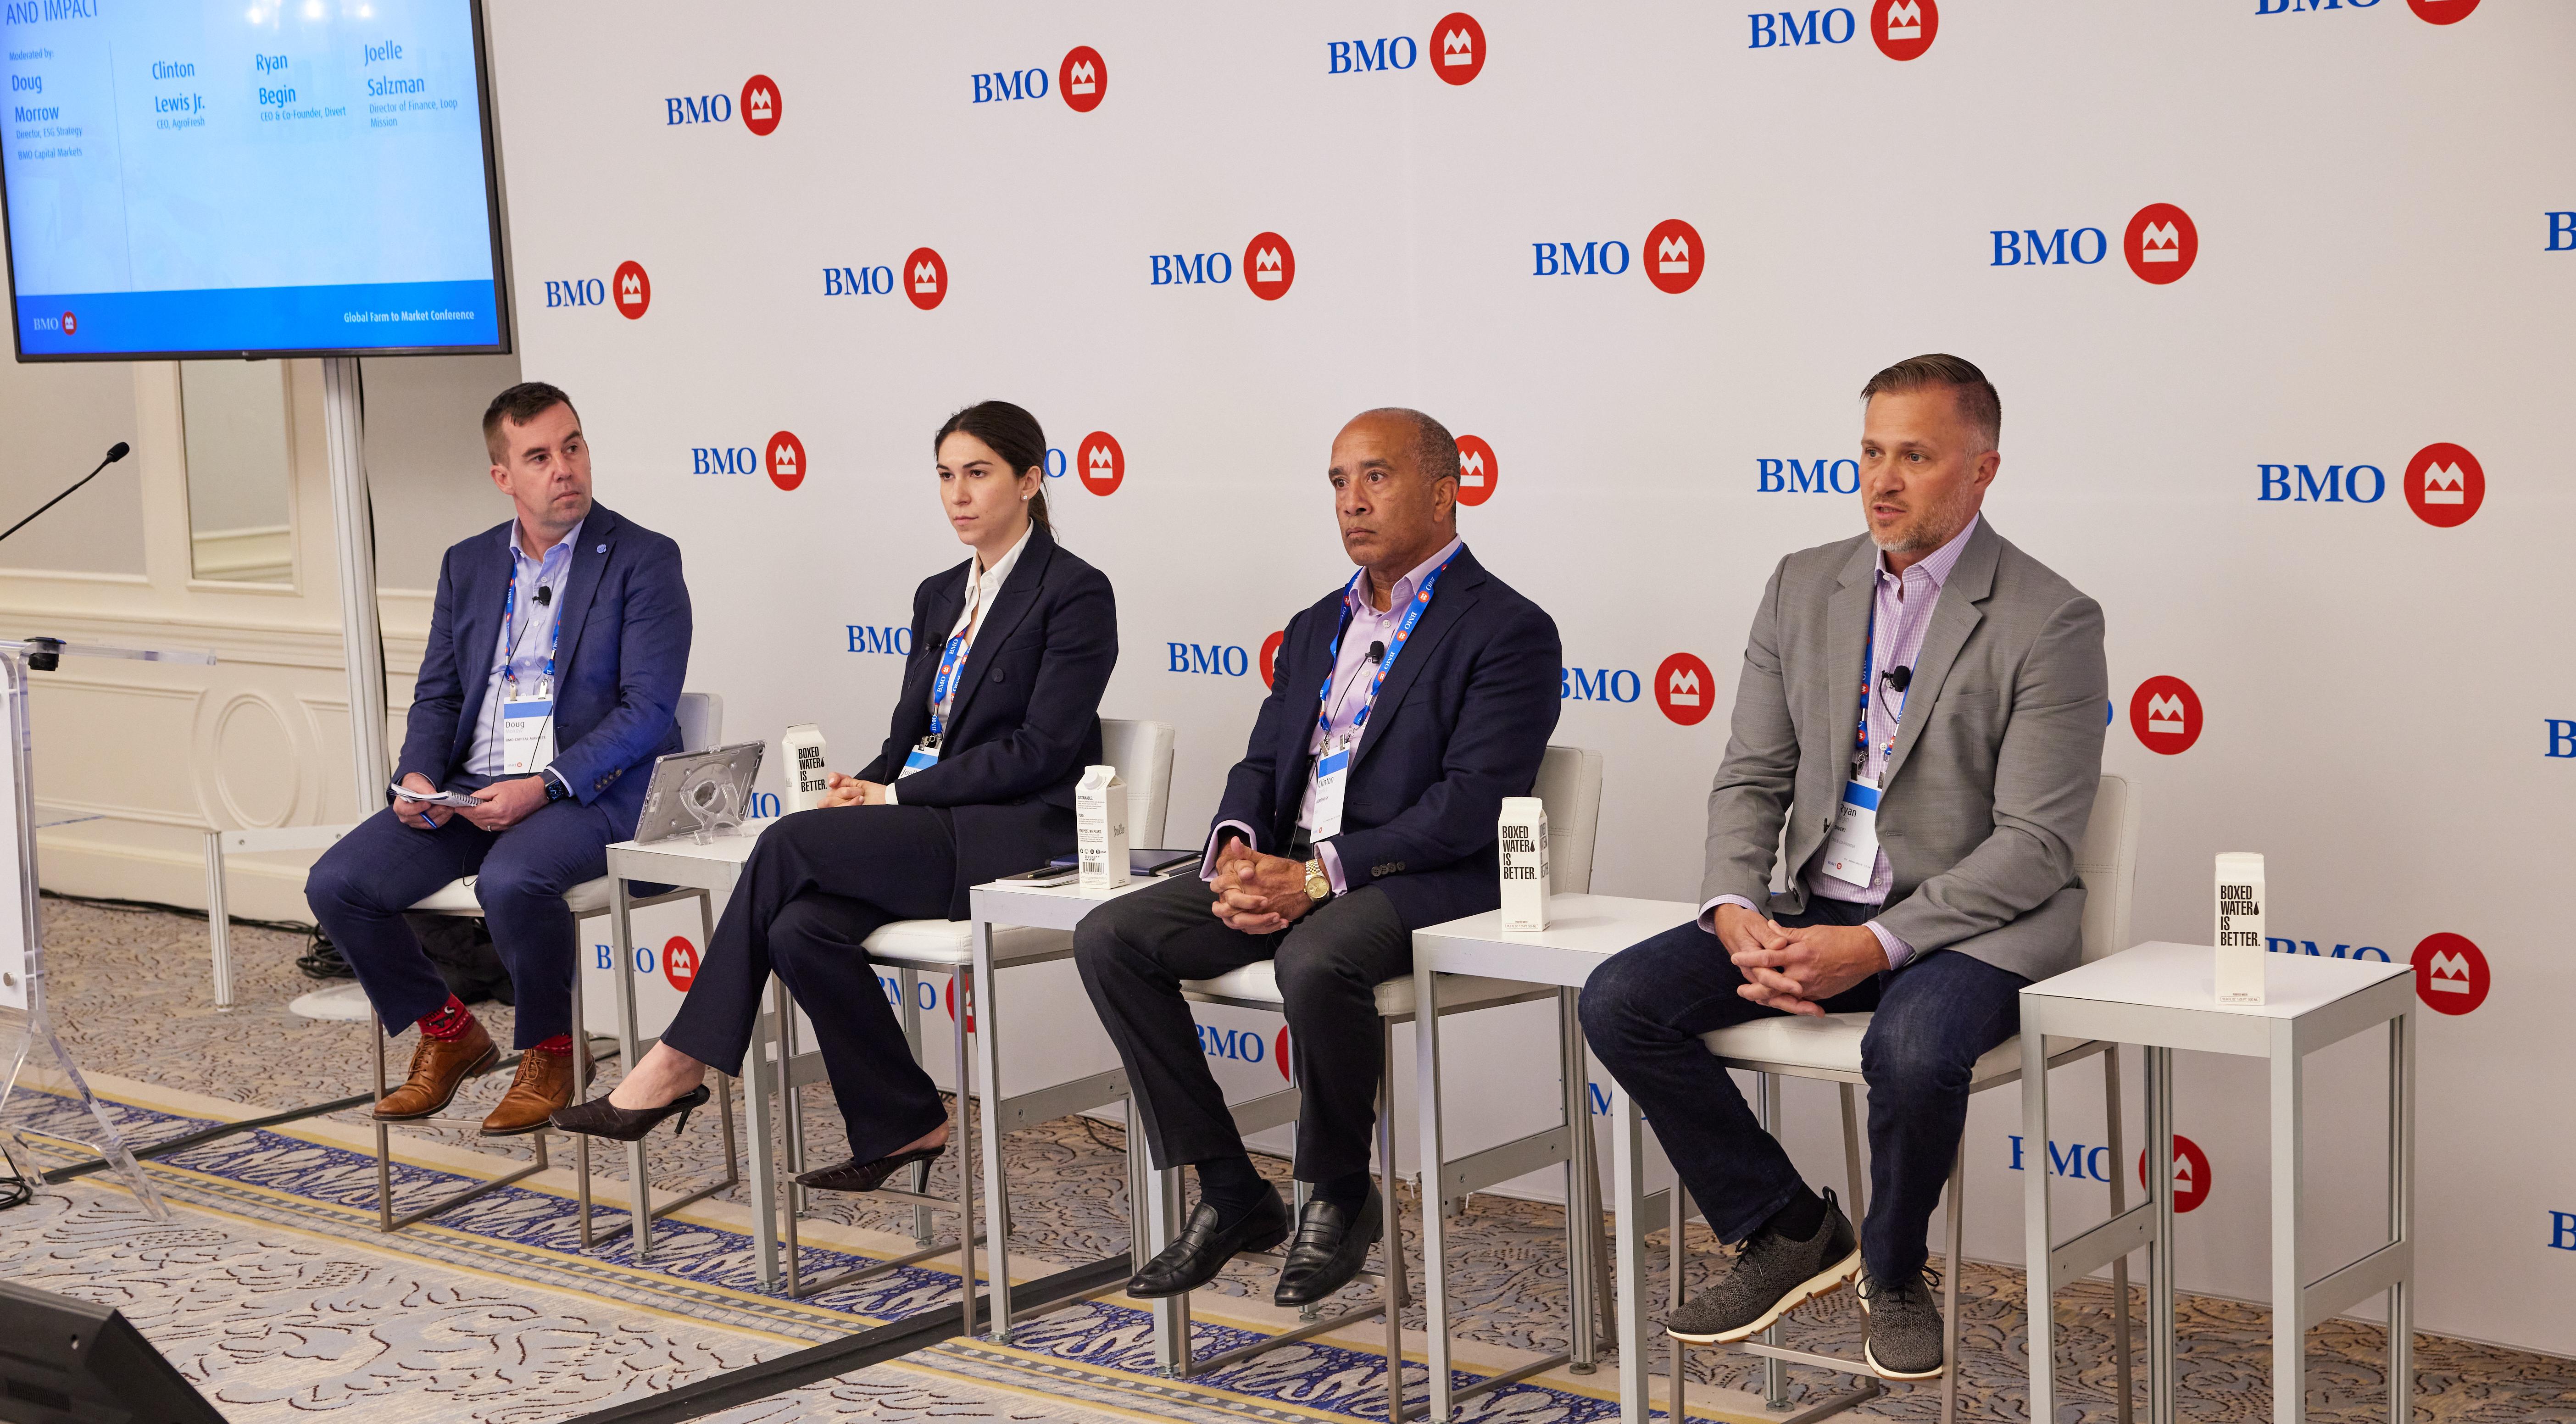 Panelists on the food waste panel at our BMO Global Farm to Market Conference.